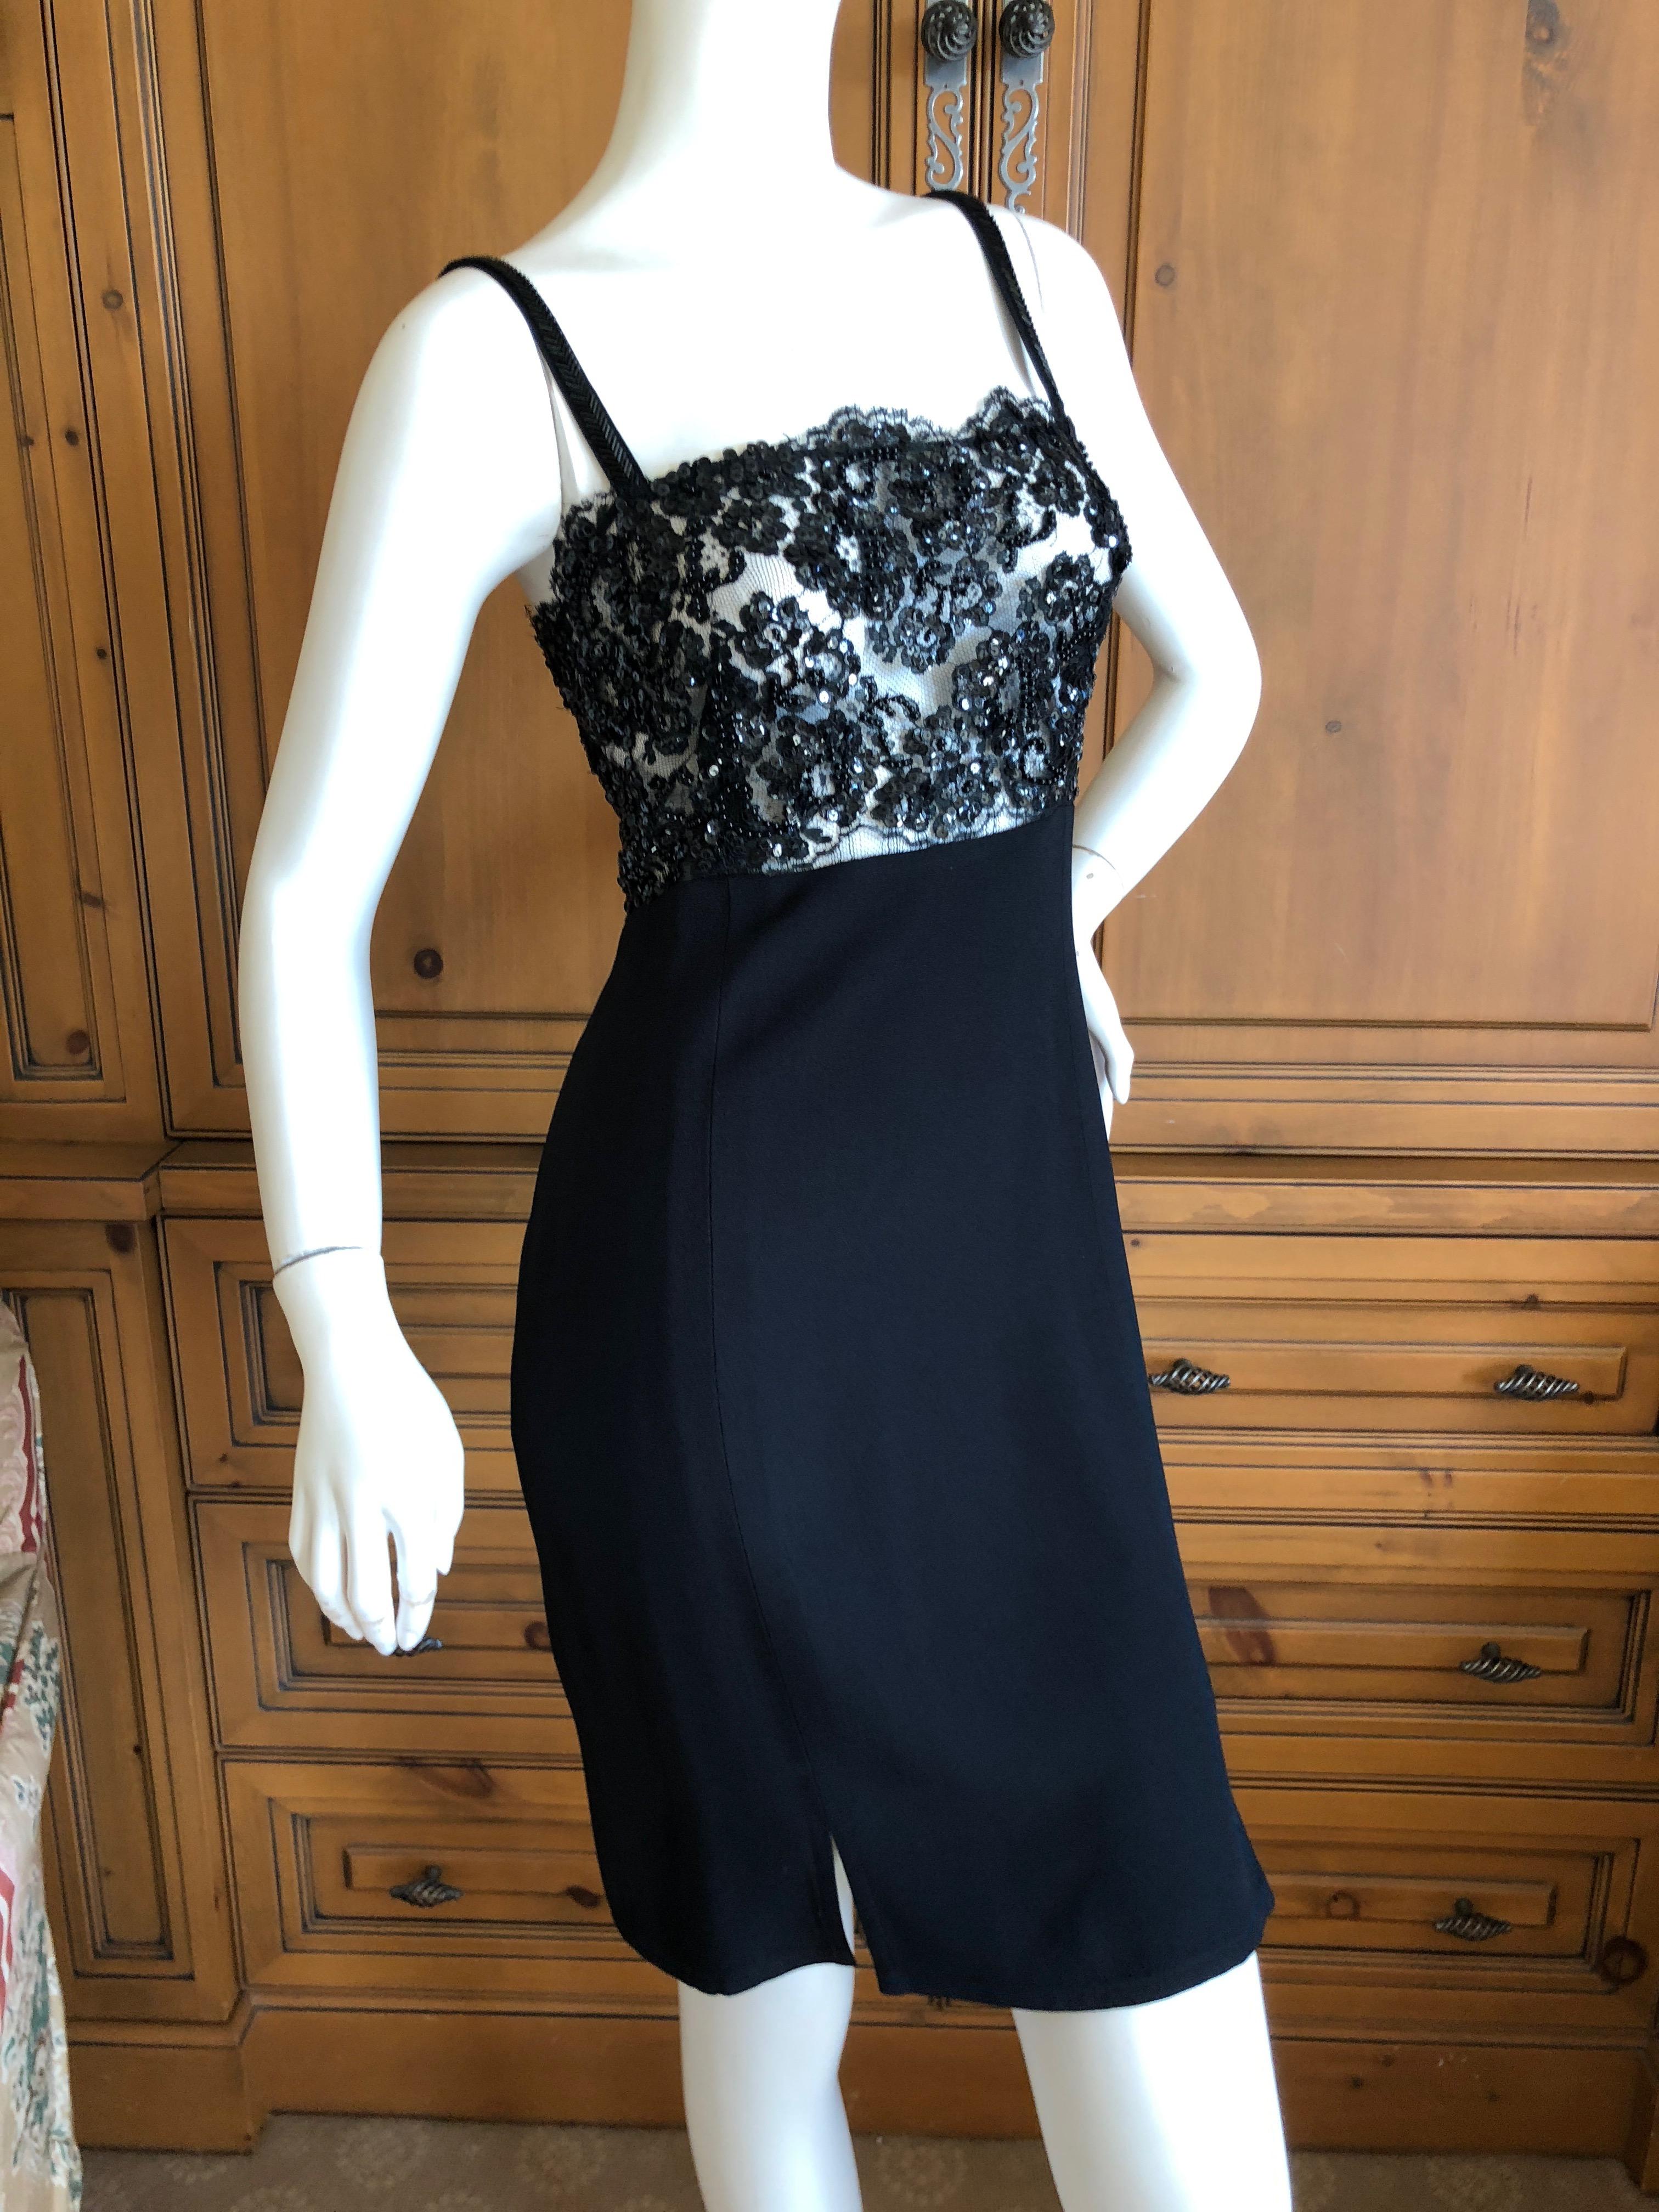 Sonia Rykiel LBD with Sheer Sequin Accented Lace Bodice For Sale 1